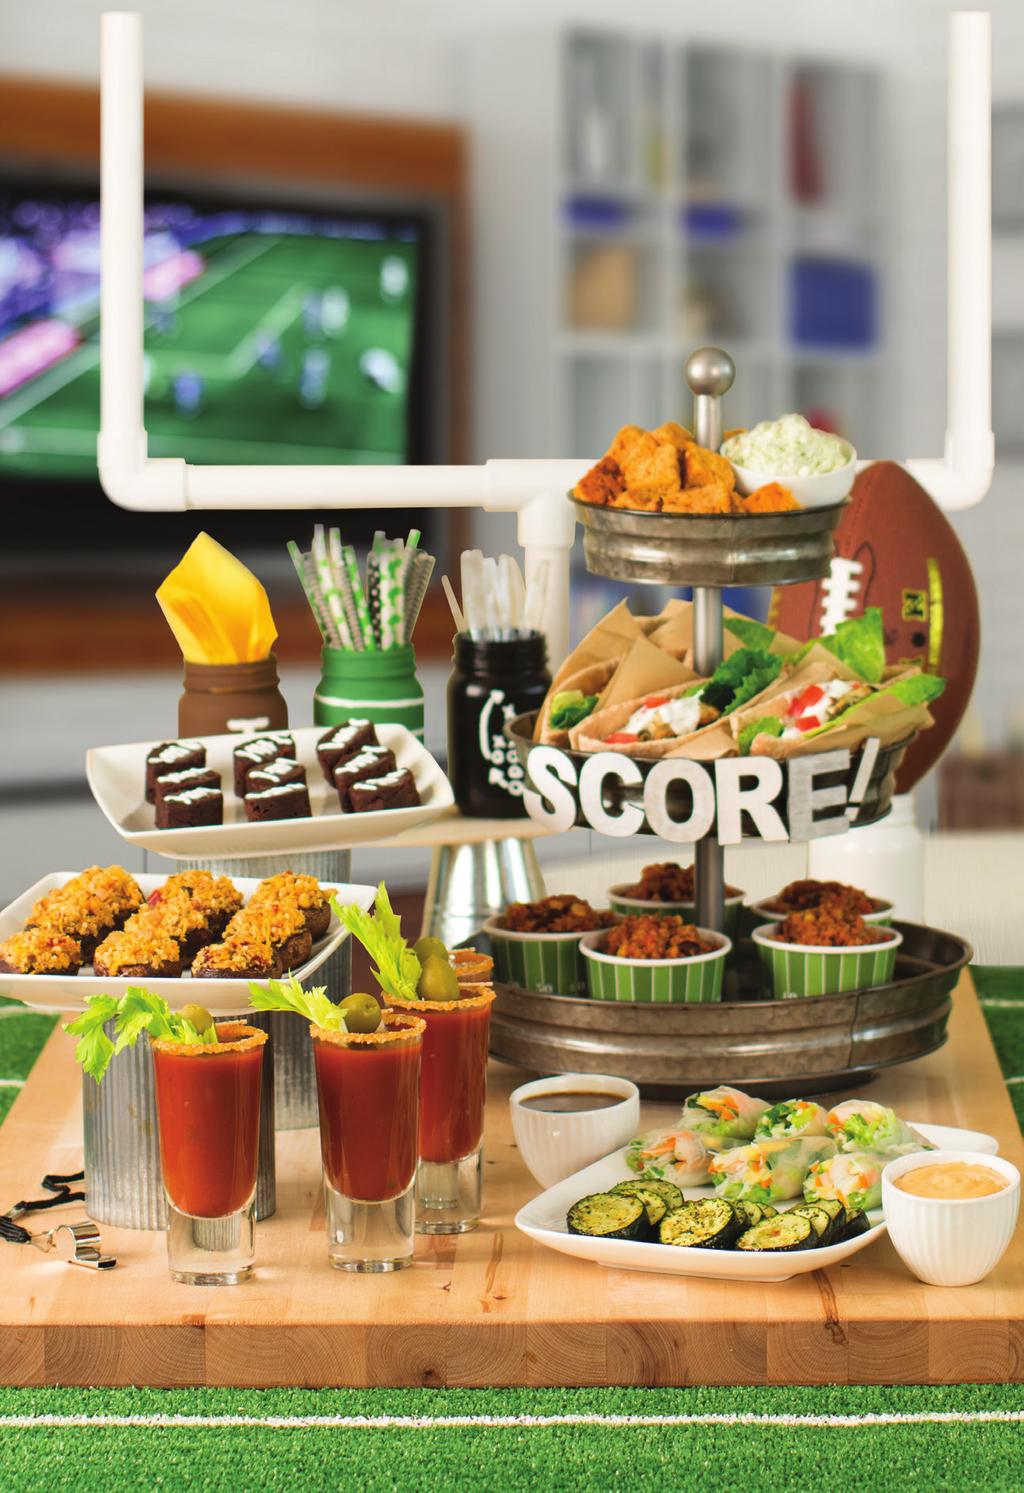 Big Game Day Menu prepared with the Big Game Day Collection (Item: 202017) Baked Potato Bar 1 cup light sour cream 2-3 tablespoons Simply Salsa Mix 1 cup low fat cottage cheese 1-2 teaspoons Spinach